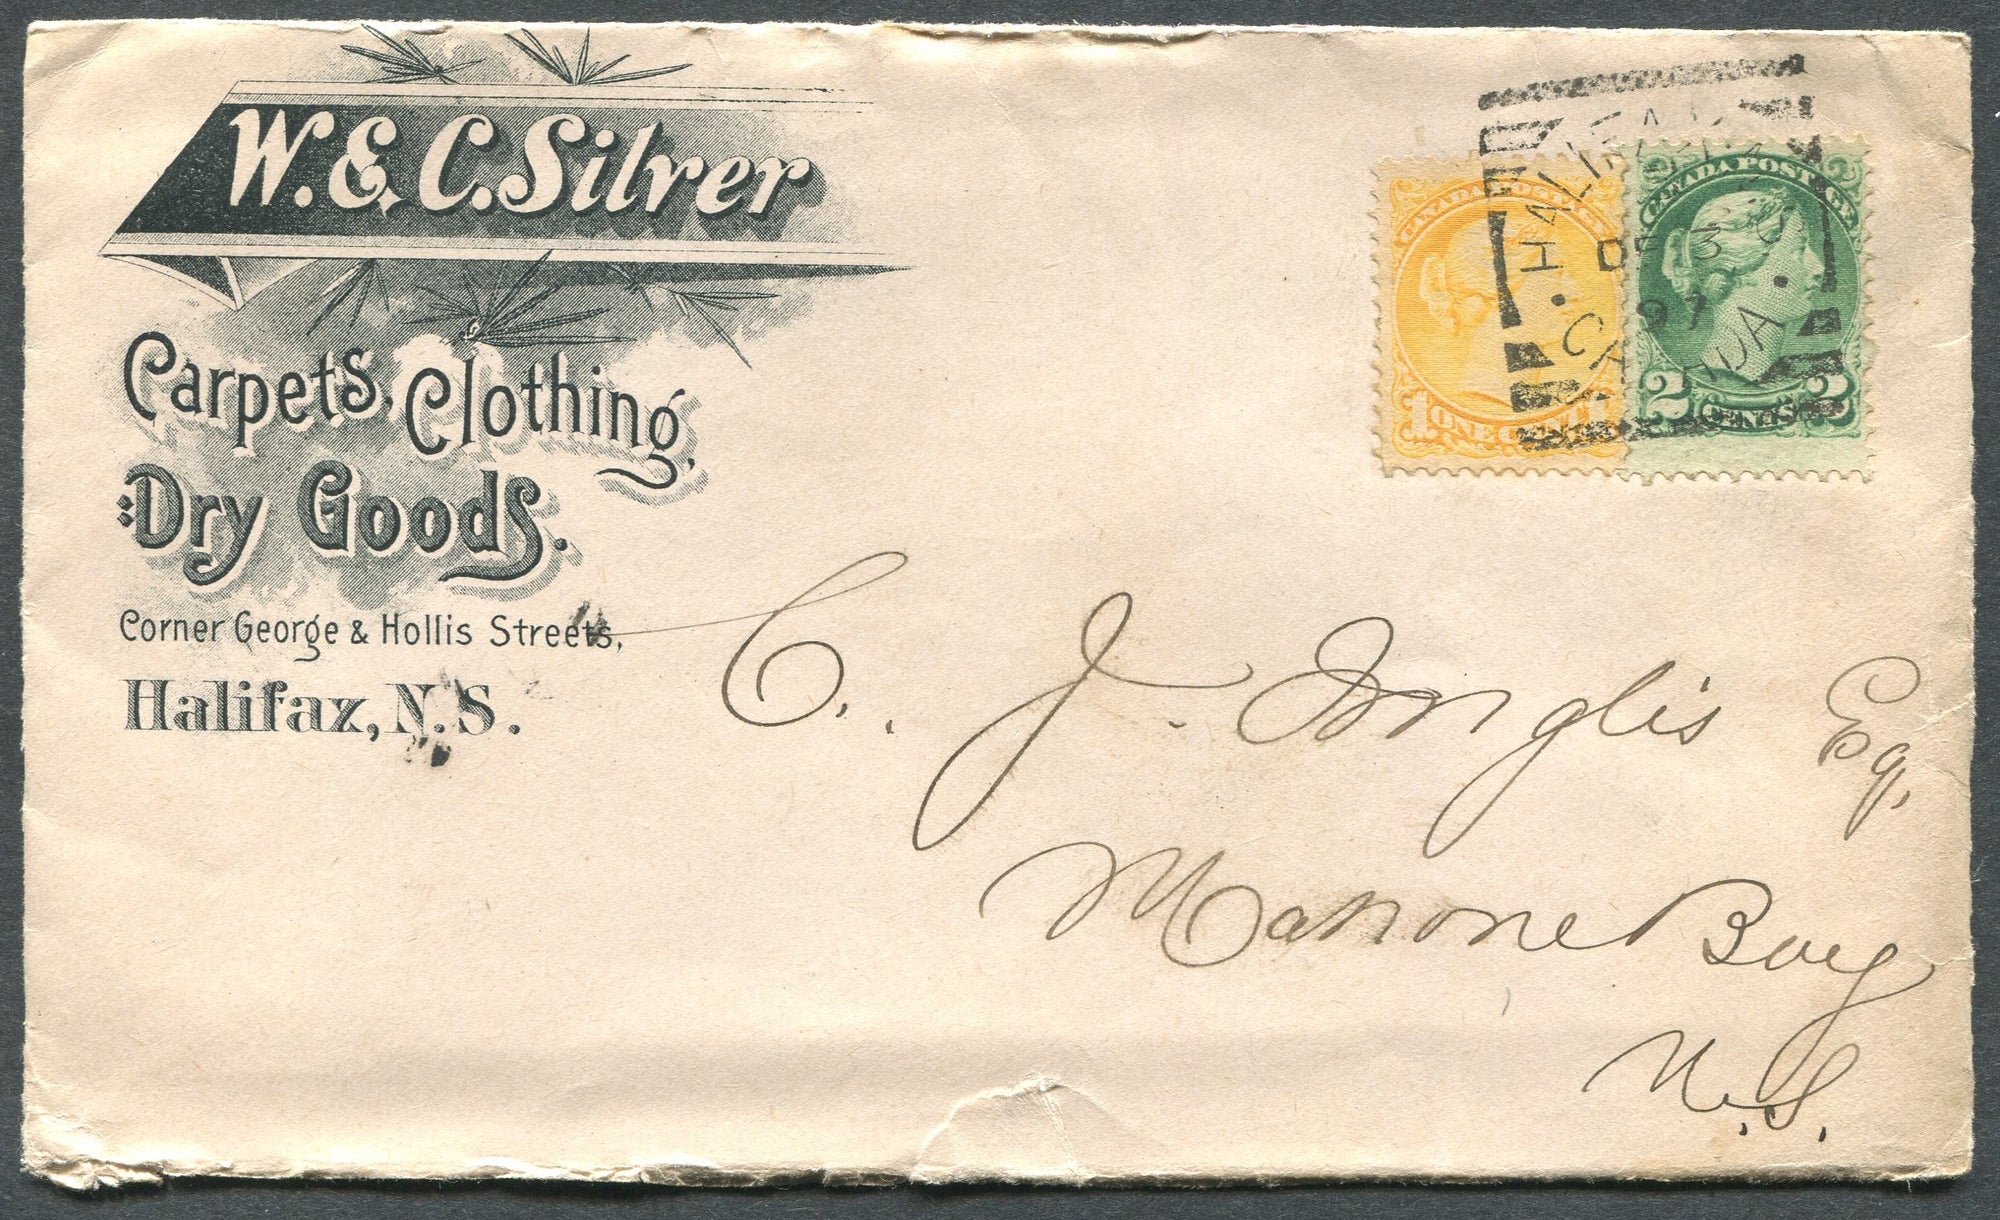 0035NS1903 - #35 & 36 on 'W. & C. SILVER' Advertising Cover